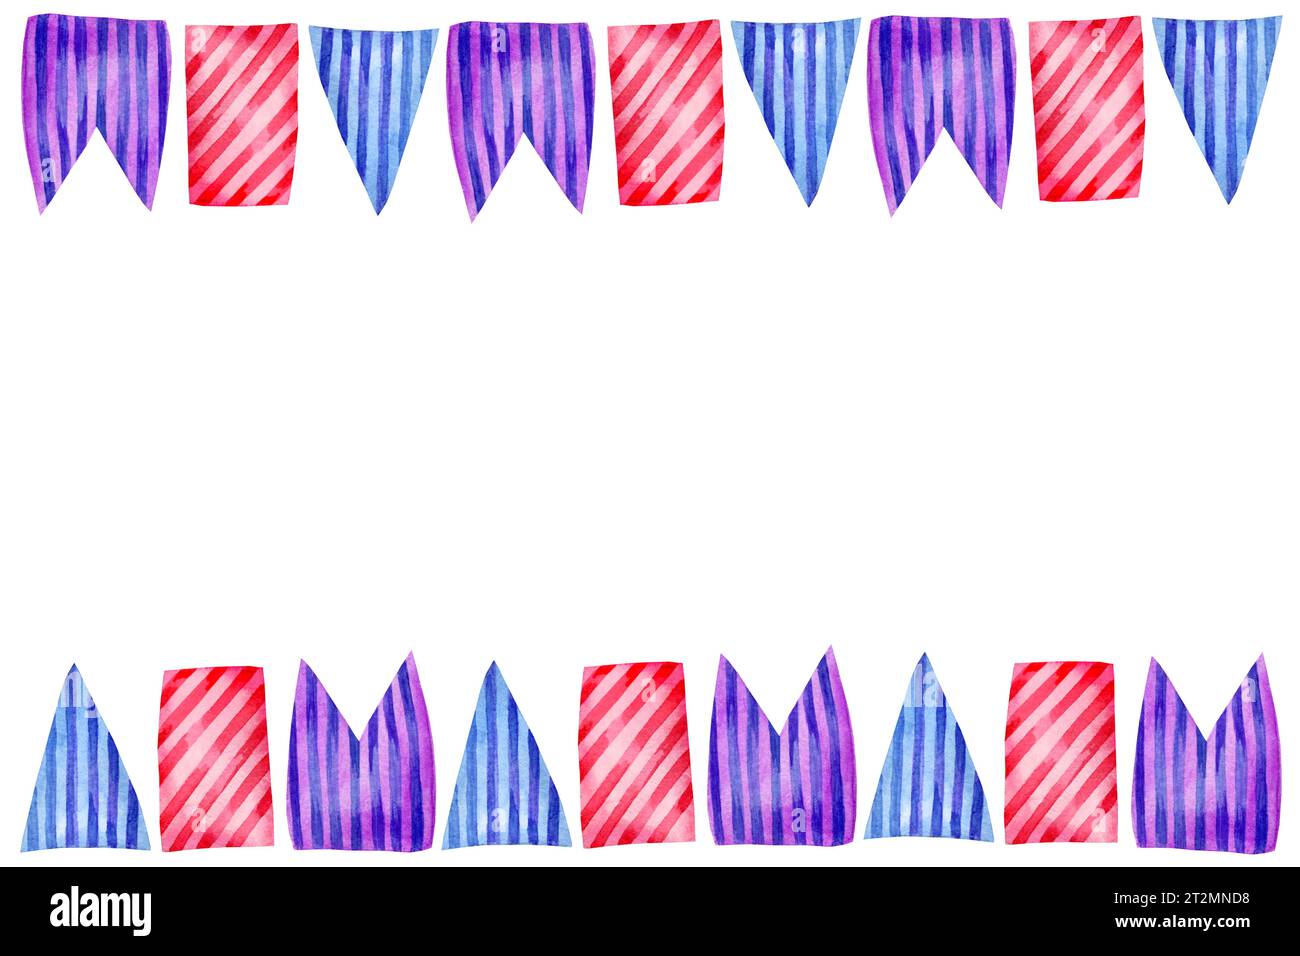 Watercolor horizontal frame with different striped flags, hand drawn illustration of garland of blue, magenta, purple flags isolated on white backgrou Stock Photo